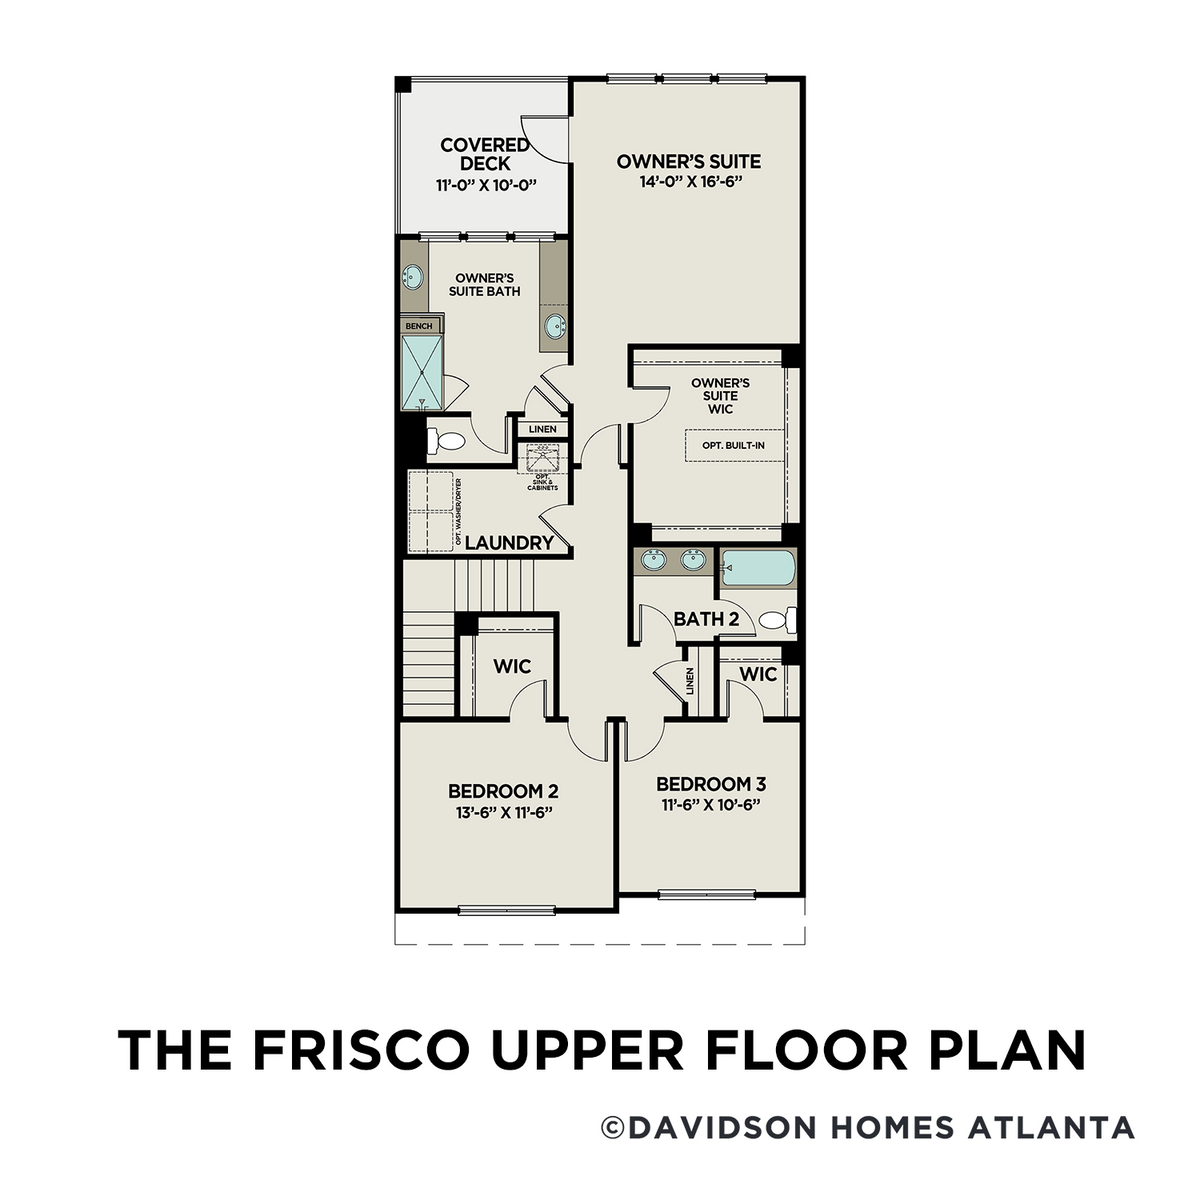 2 - The Frisco C floor plan layout for 695 Stickley Oak Way in Davidson Homes' The Village at Towne Lake community.